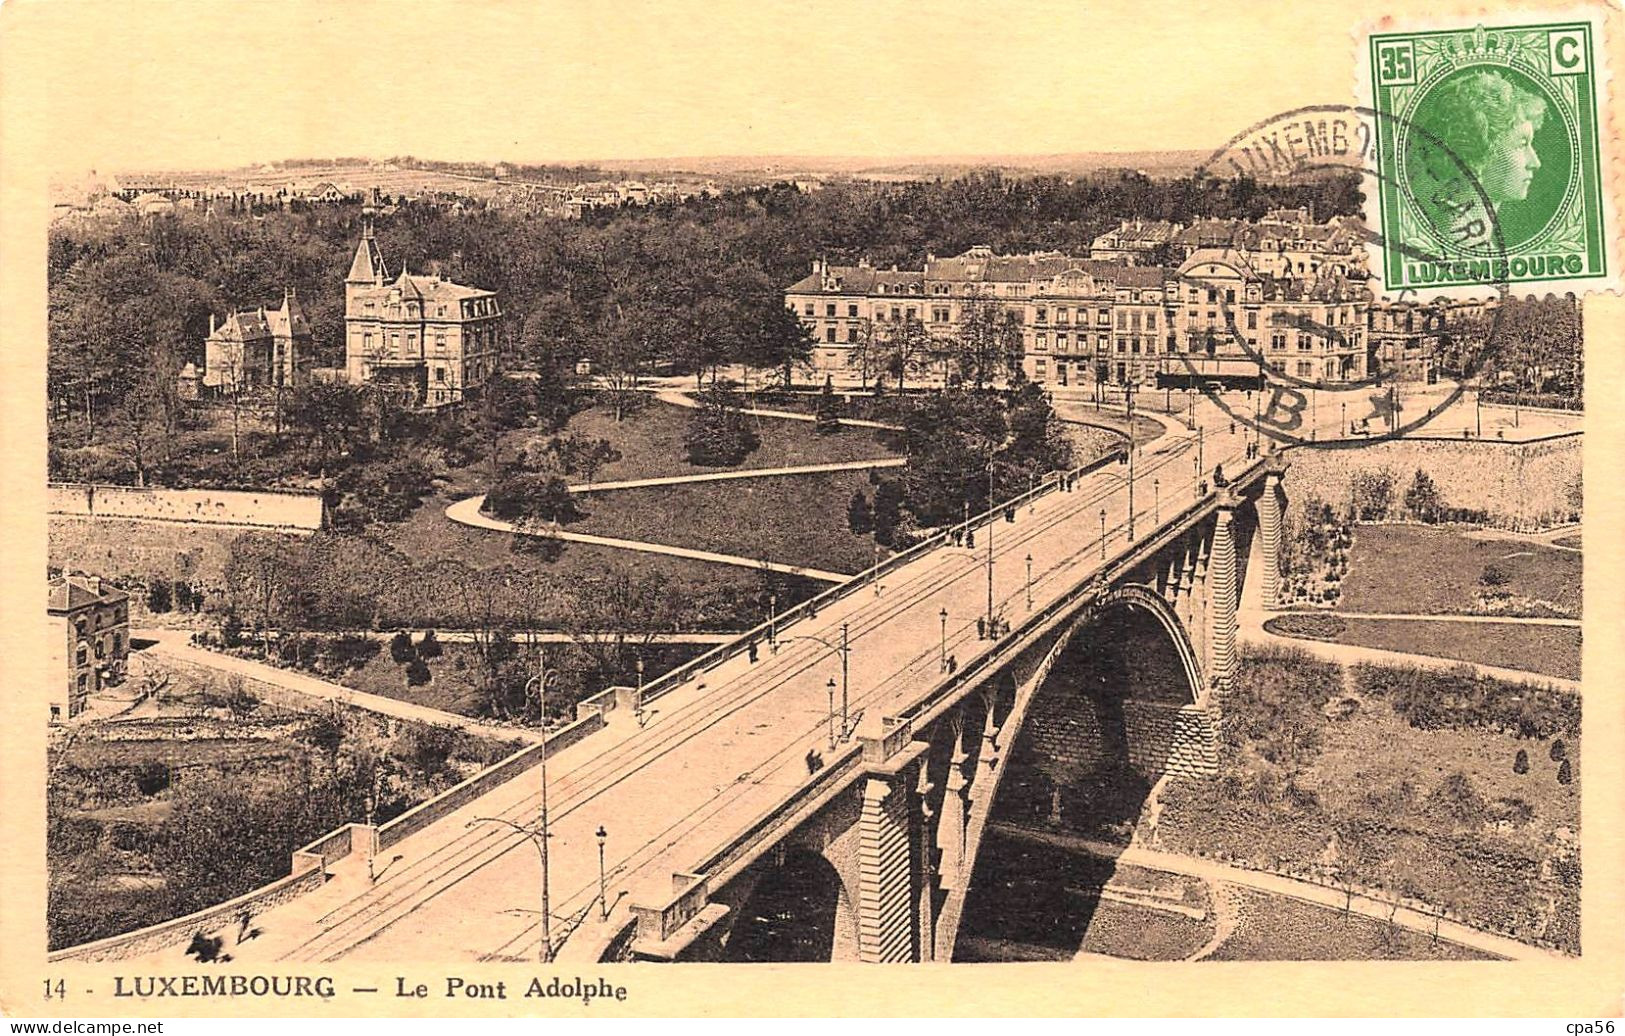 Le PONT ADOLPHE - LUXEMBOURG - Cachet LUXEMBOURG GARE B - Lussemburgo - Città